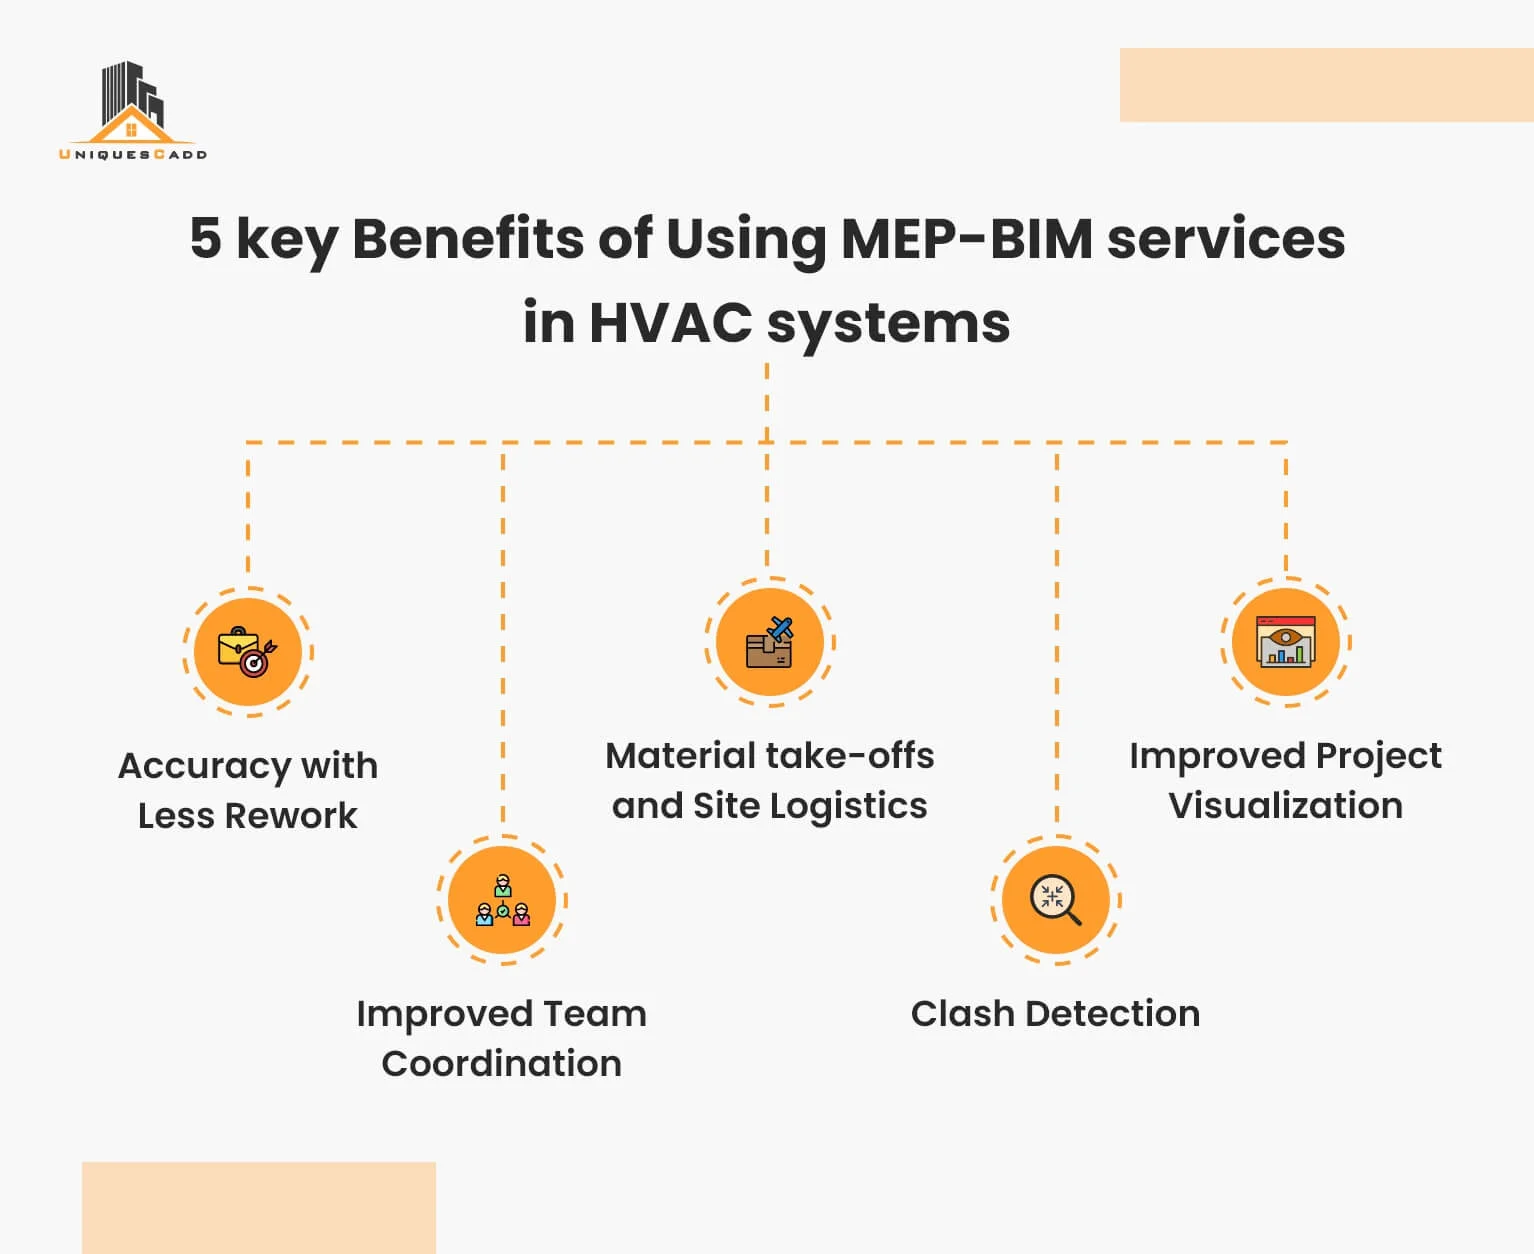 5 key Benefits of Using MEP-BIM services in HVAC systems